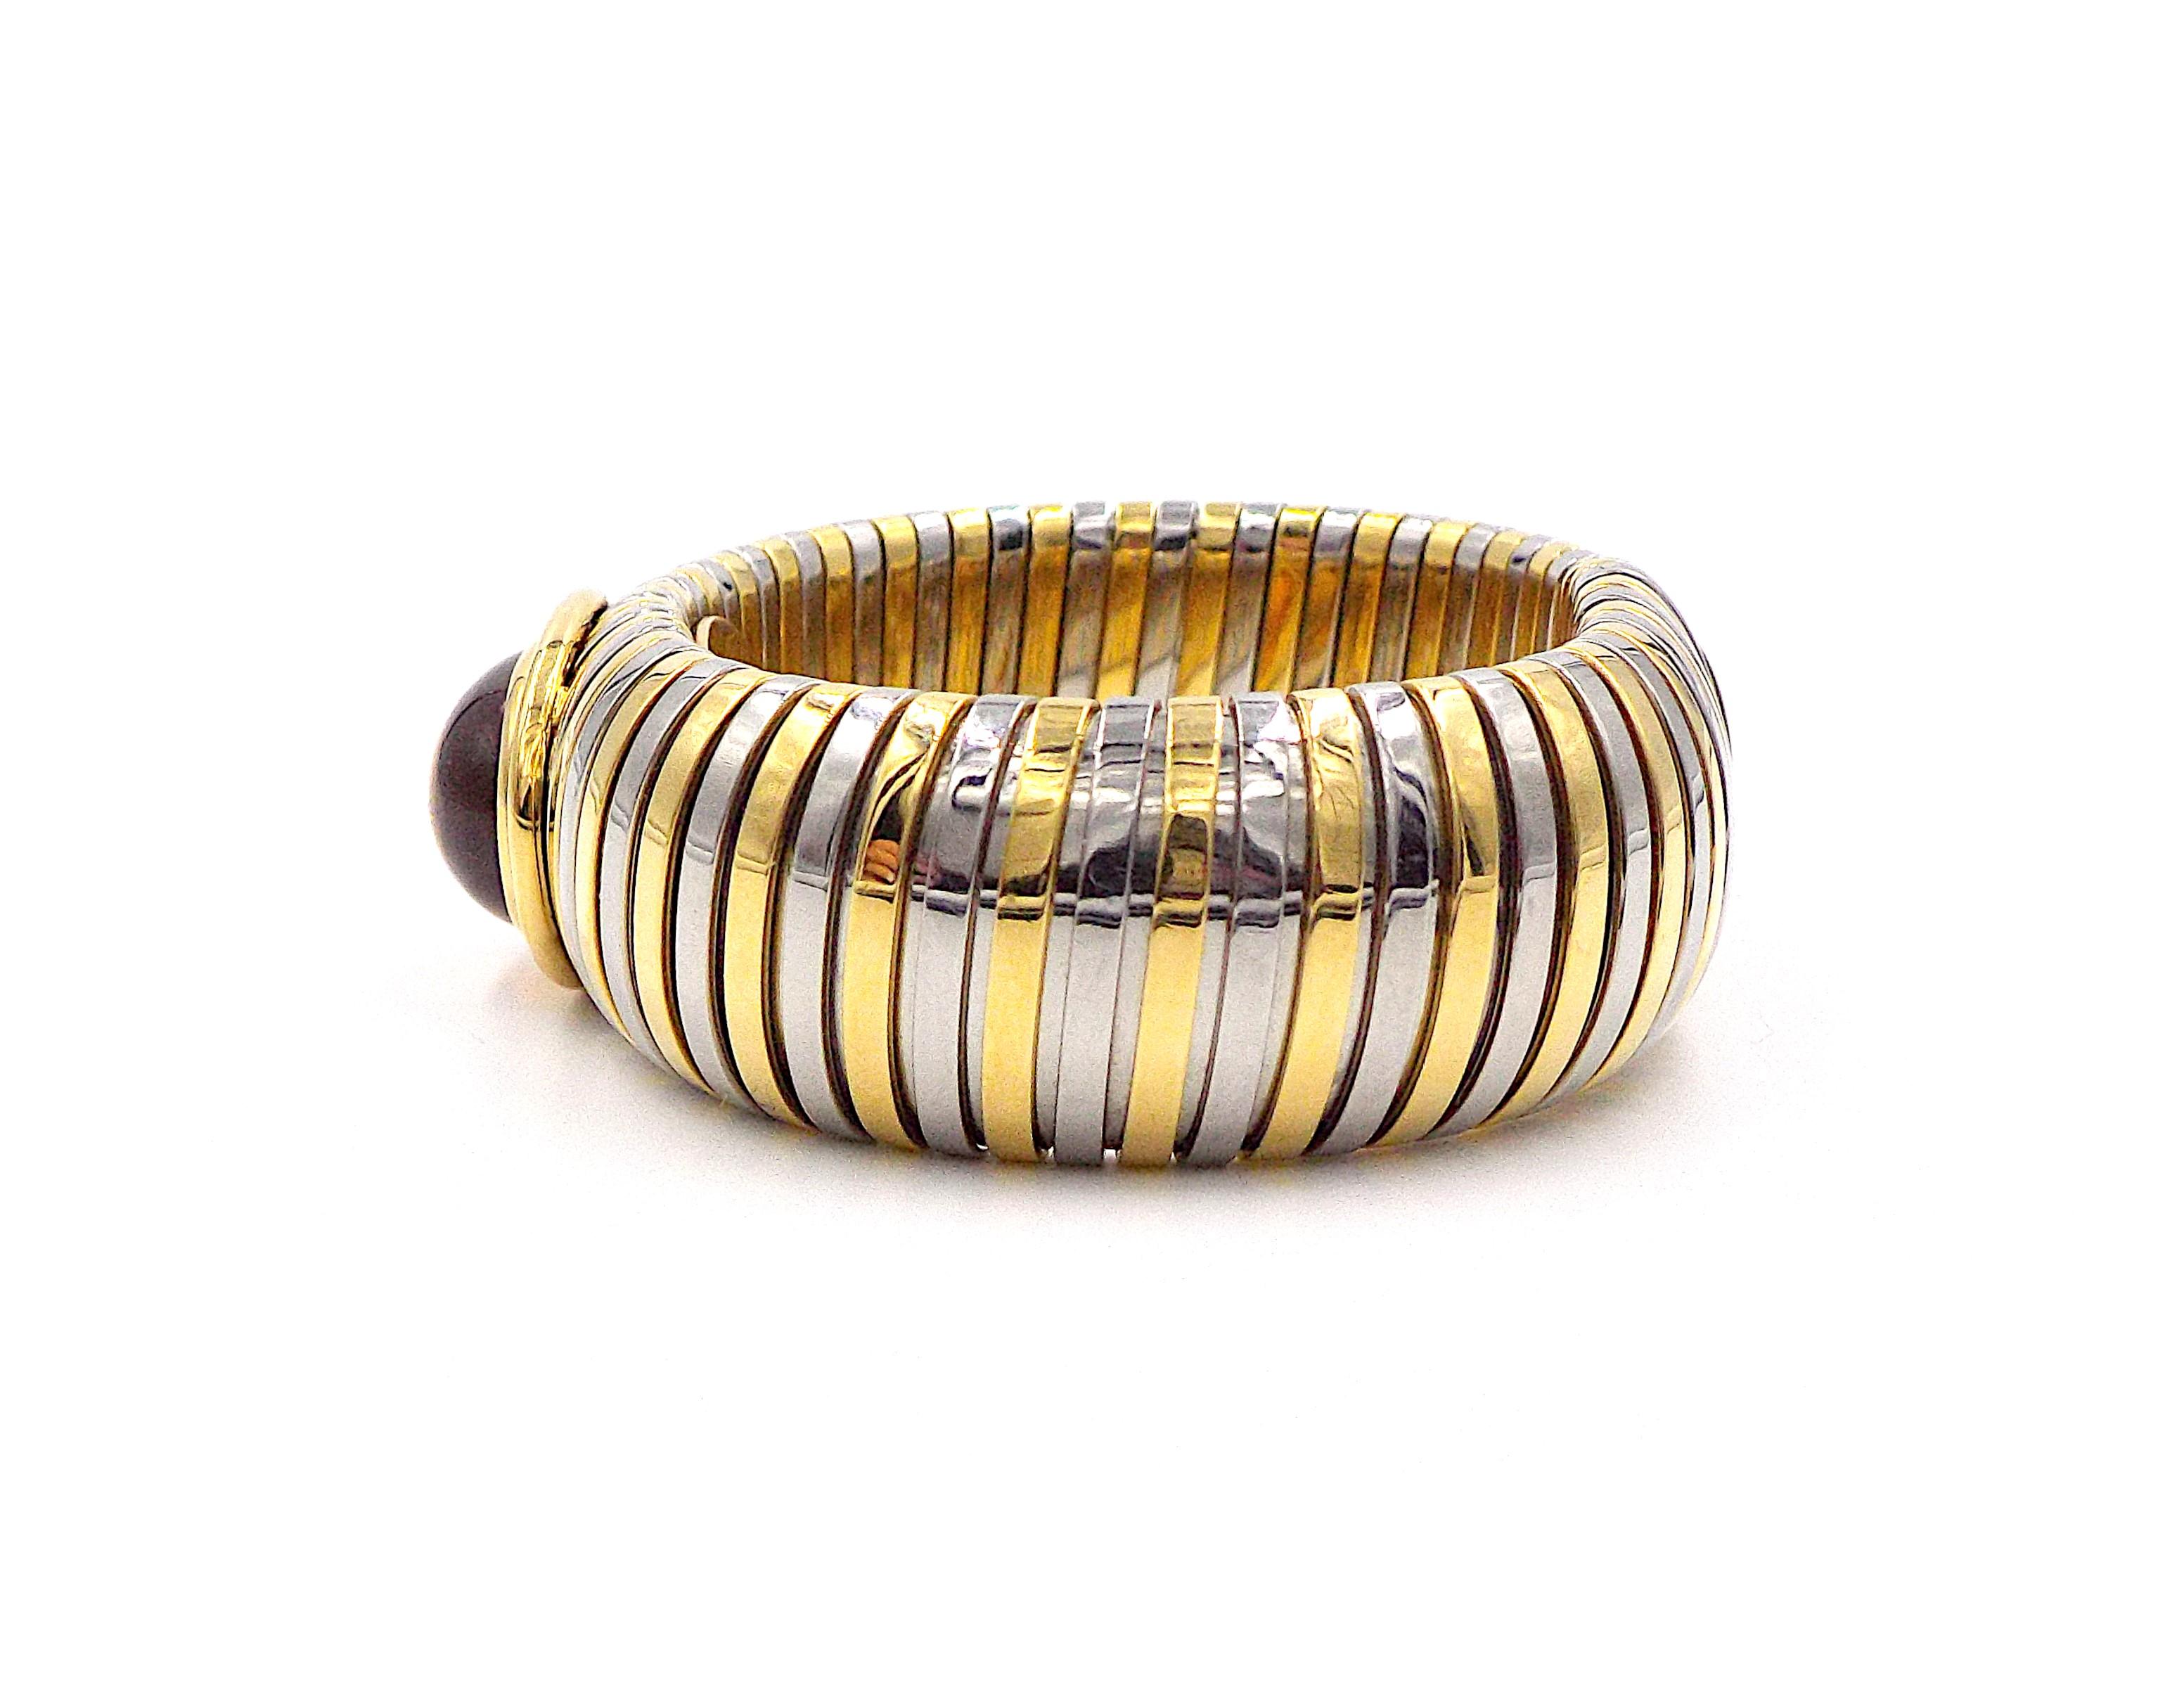 A chic and stylish wide bangle bracelet by Bvlgari made of 18K yellow gold and steel, featuring a large cabochon citrine stone, tubogas model. Min. internal circumference is ap. 6.25